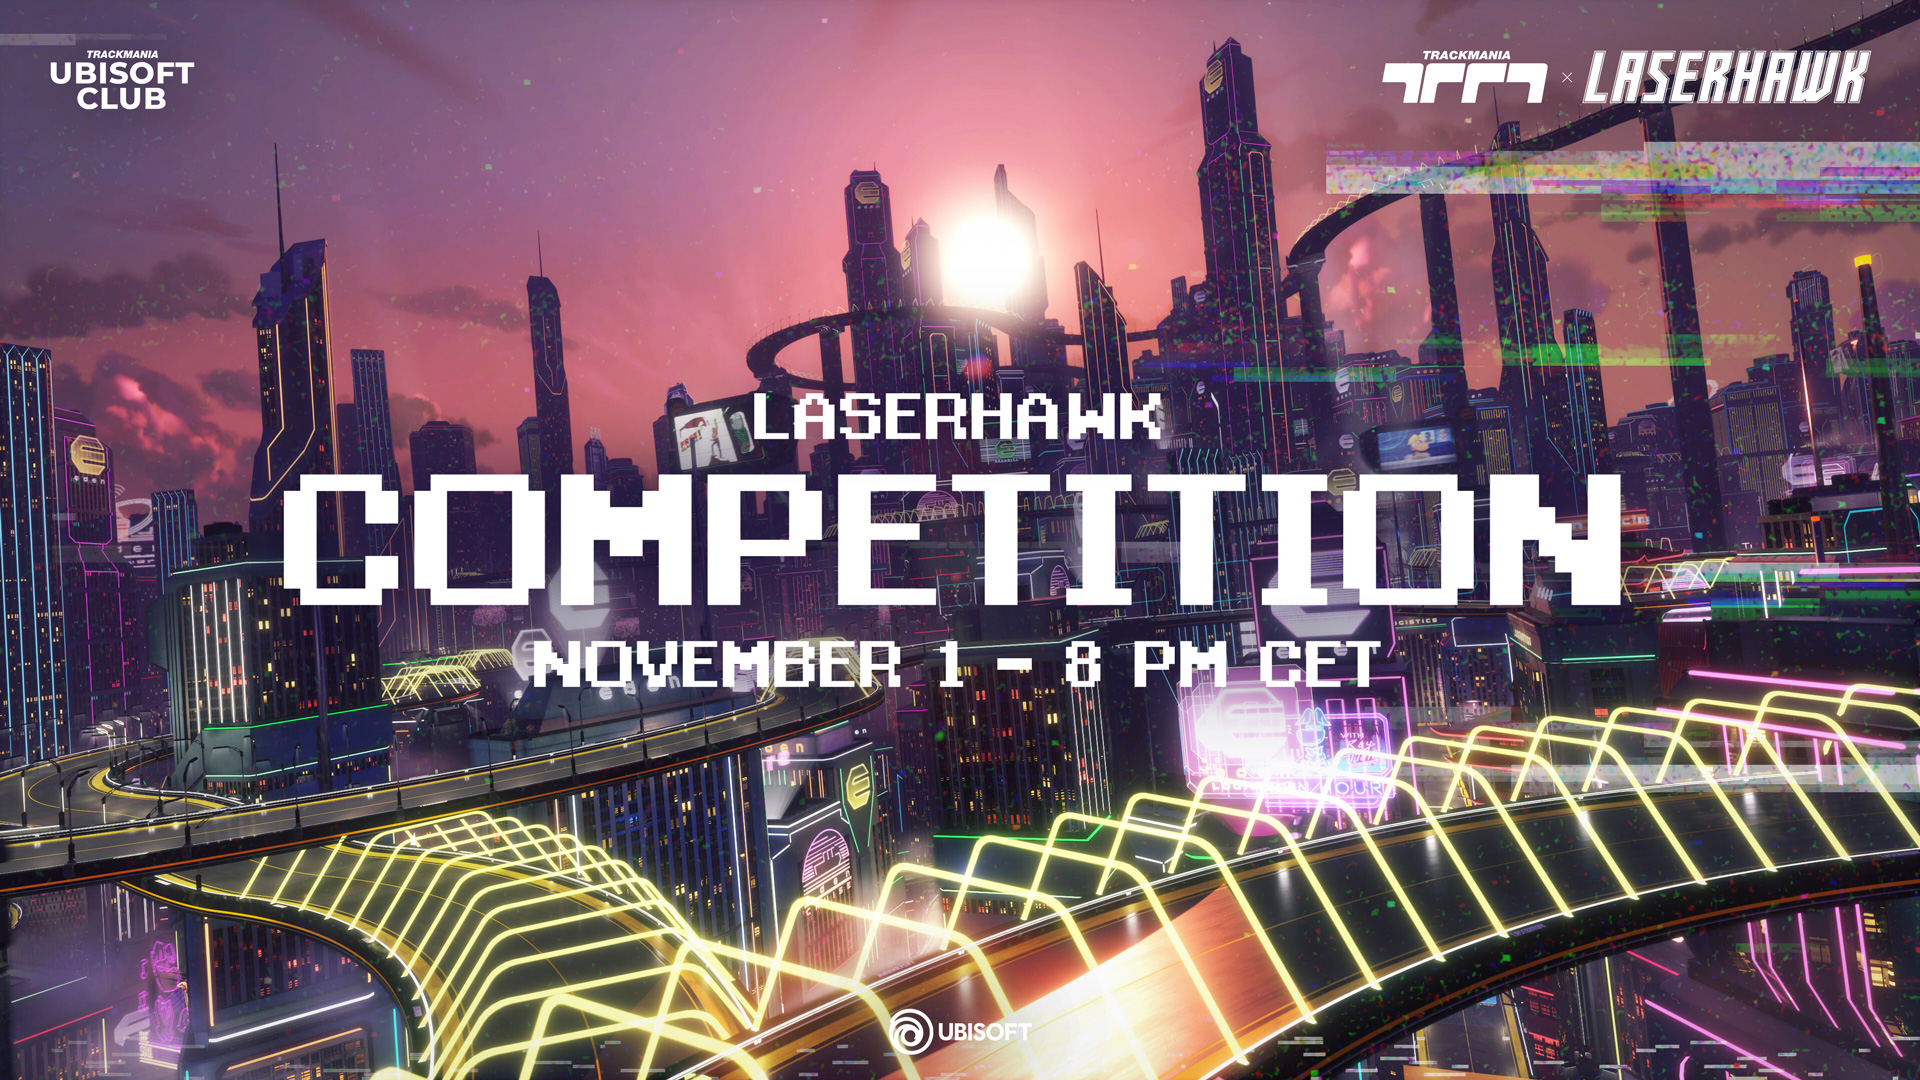 JOIN THE LASERHAWK COMPETITIONS TO WIN SPECIAL REWARDS!